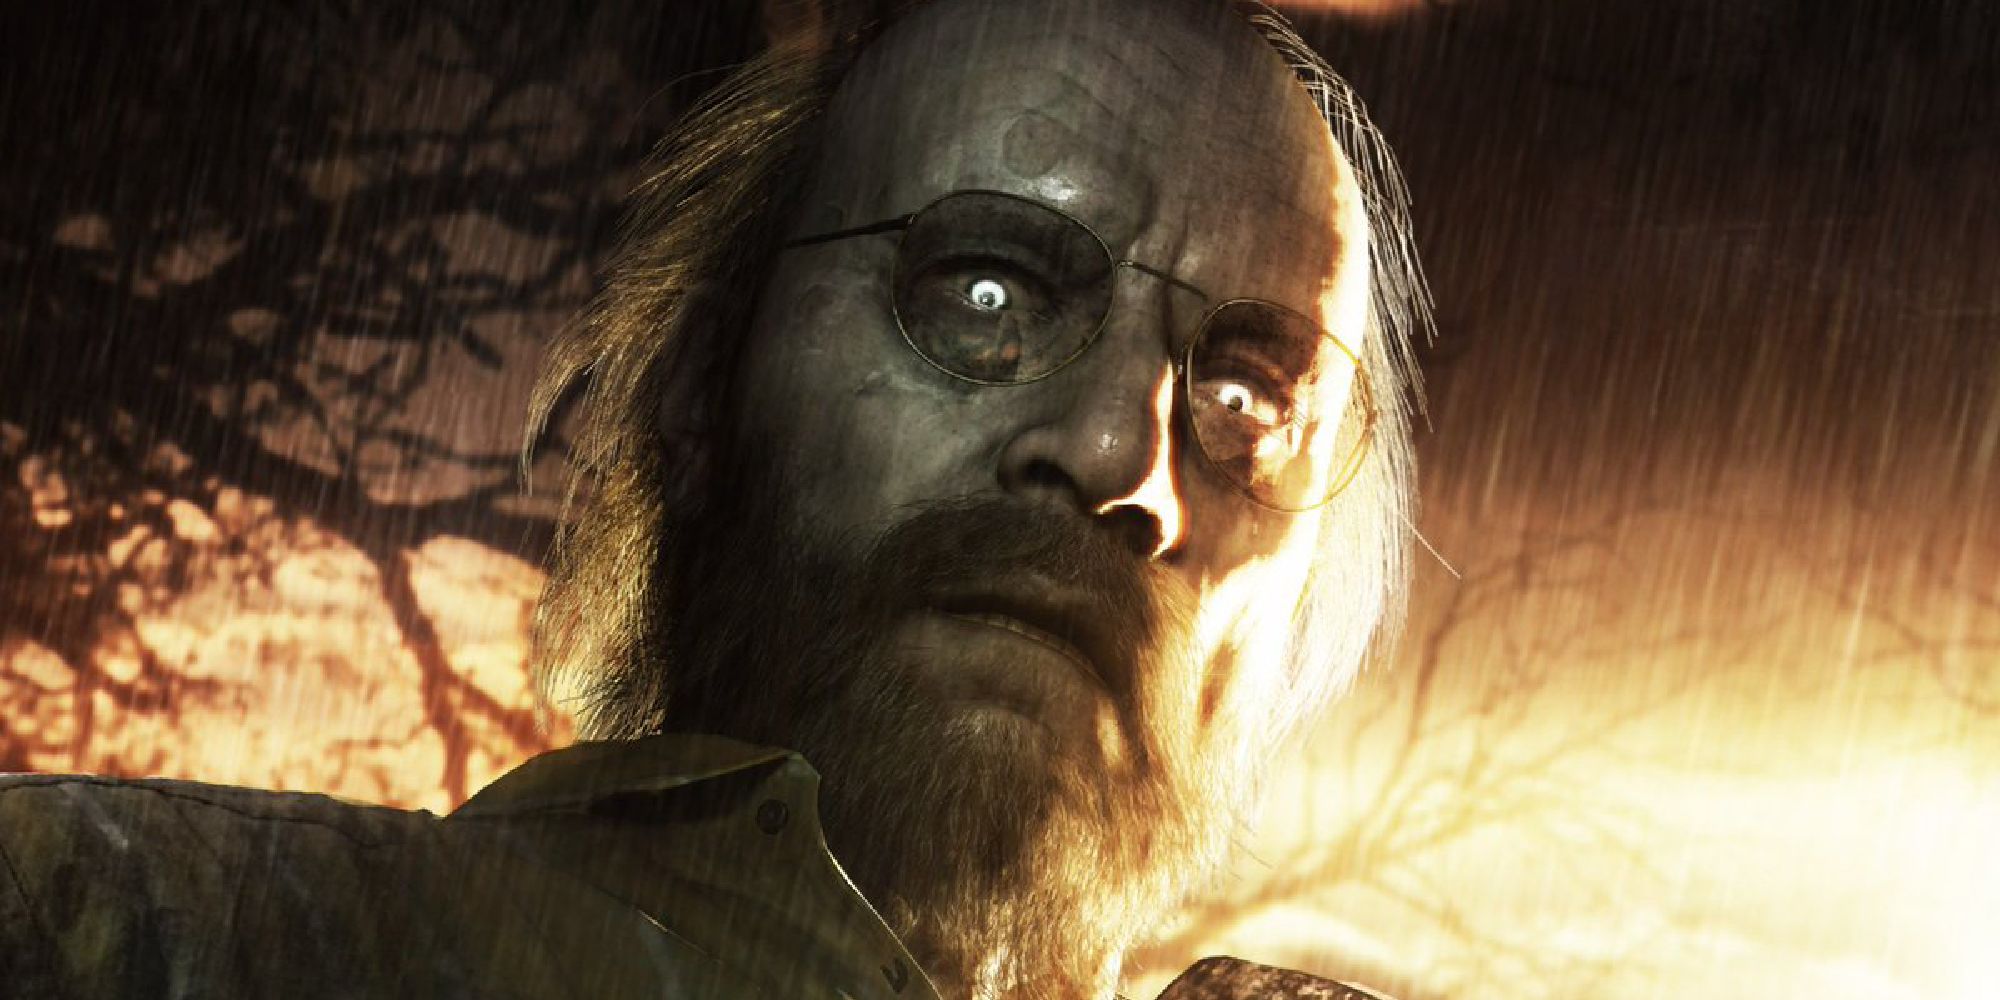 Jack Baker from Resident Evil, looking down at the camera with glowing, piercing eyes. 